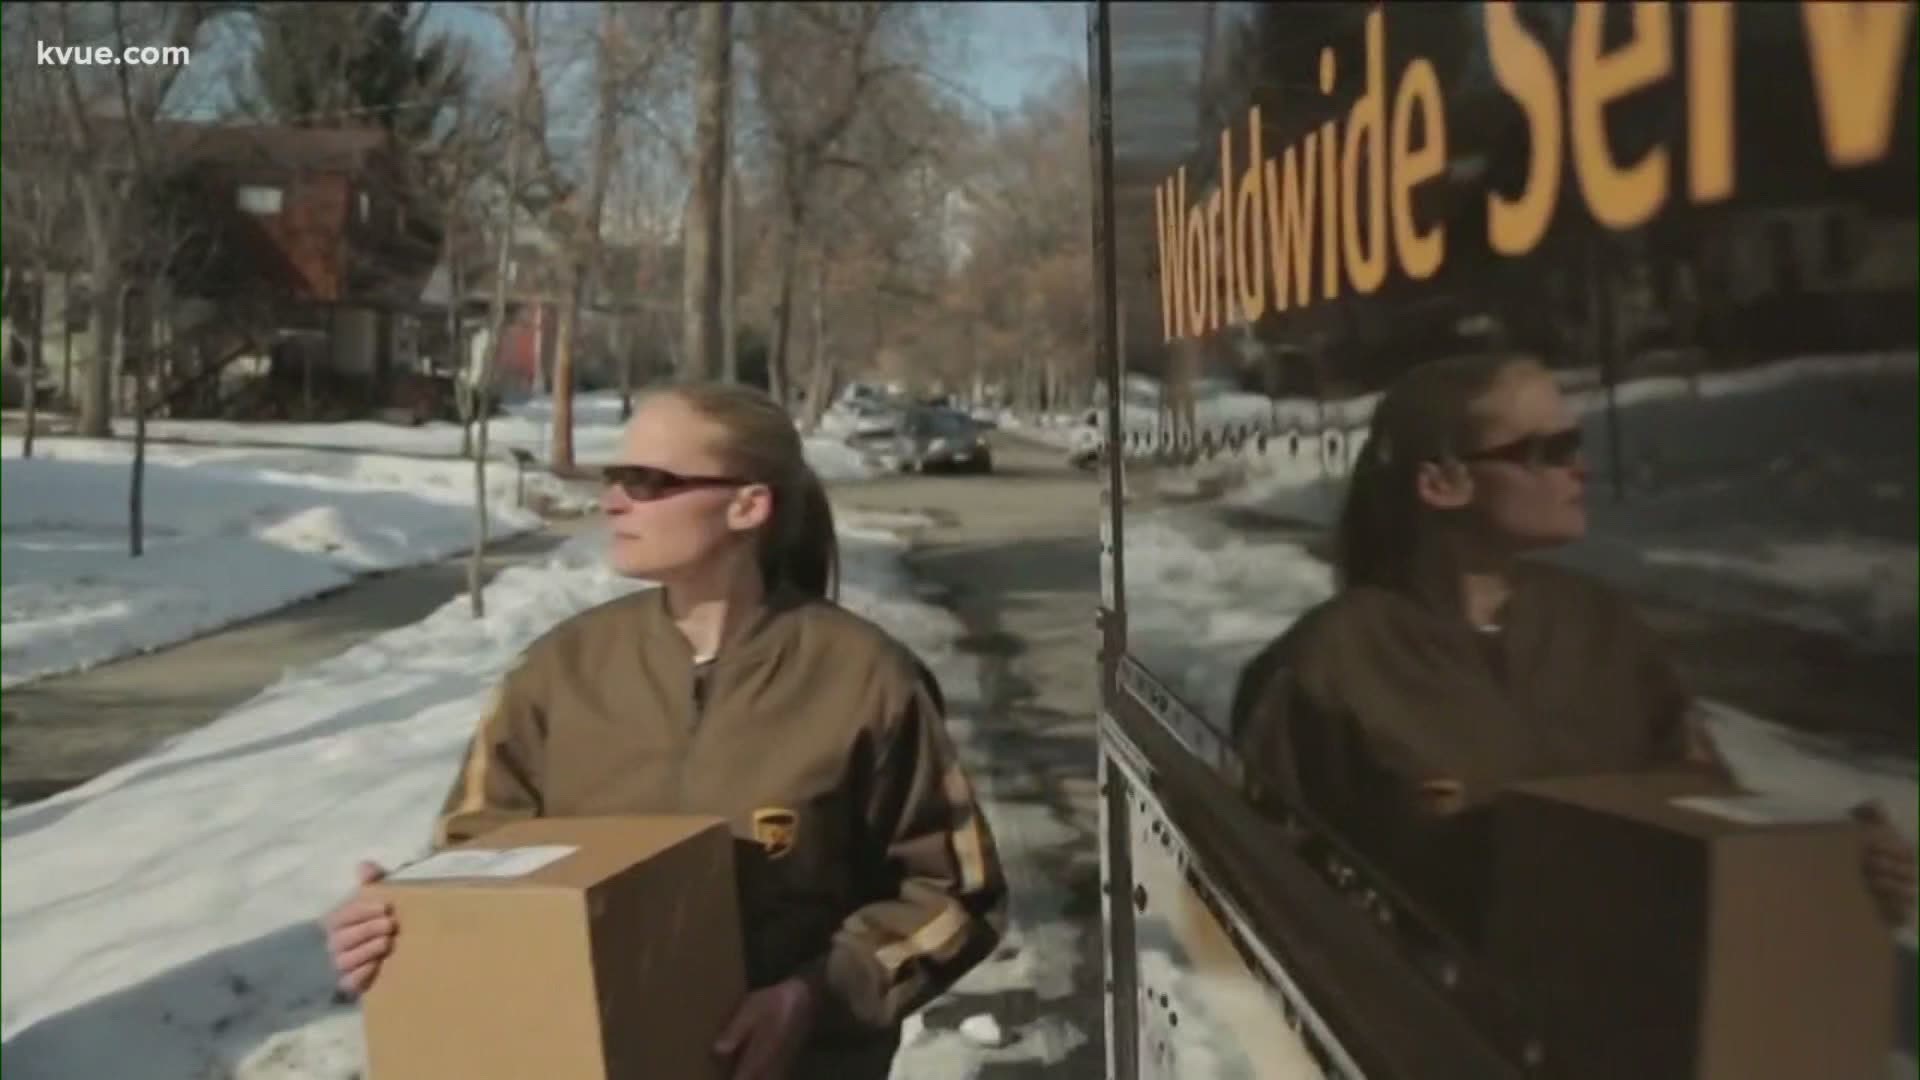 UPS is hiring thousands of people across the country and about 600 of those positions are in the Austin area.